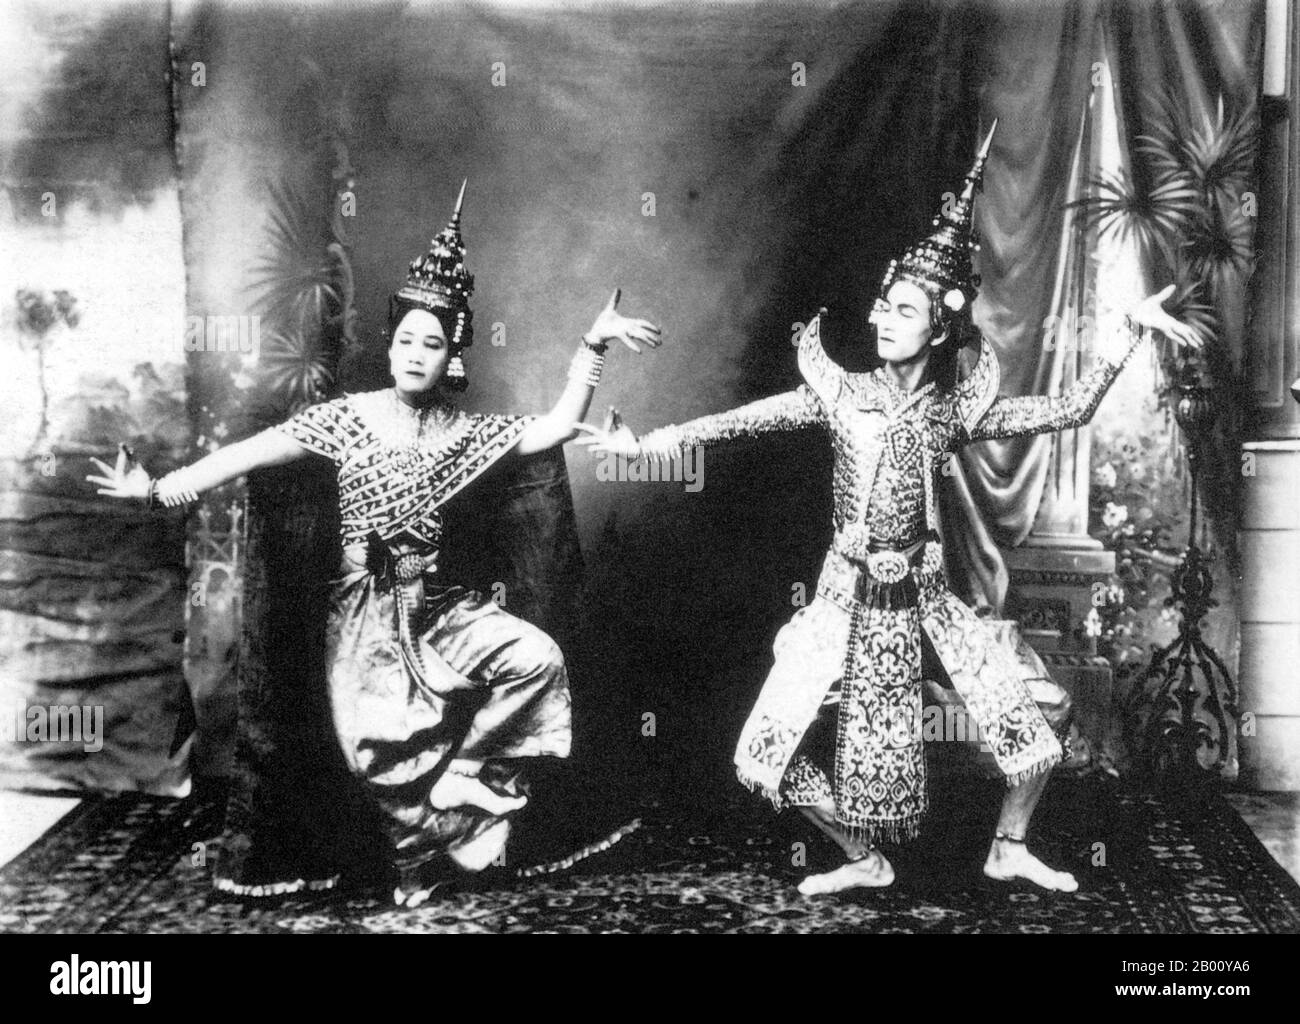 Thailand: An 1896 photograph of two classical Siamese dancers in Udon Thani, now located in northeastern Thailand.  Siamese dance is an elegant art form refined over centuries and supported by regal patronage. The Thais reputedly first acquired a dance troupe when, in 1431 CE, they conquered the ancient Khmer capital of Angkor and took as part of their booty an entire corps de ballet - dancers whose performances had once been seen as a symbolic link between nature, earth and the realm of the gods. The two major forms of Thai classical dance drama are 'khon' and 'lakon nai'. Stock Photo